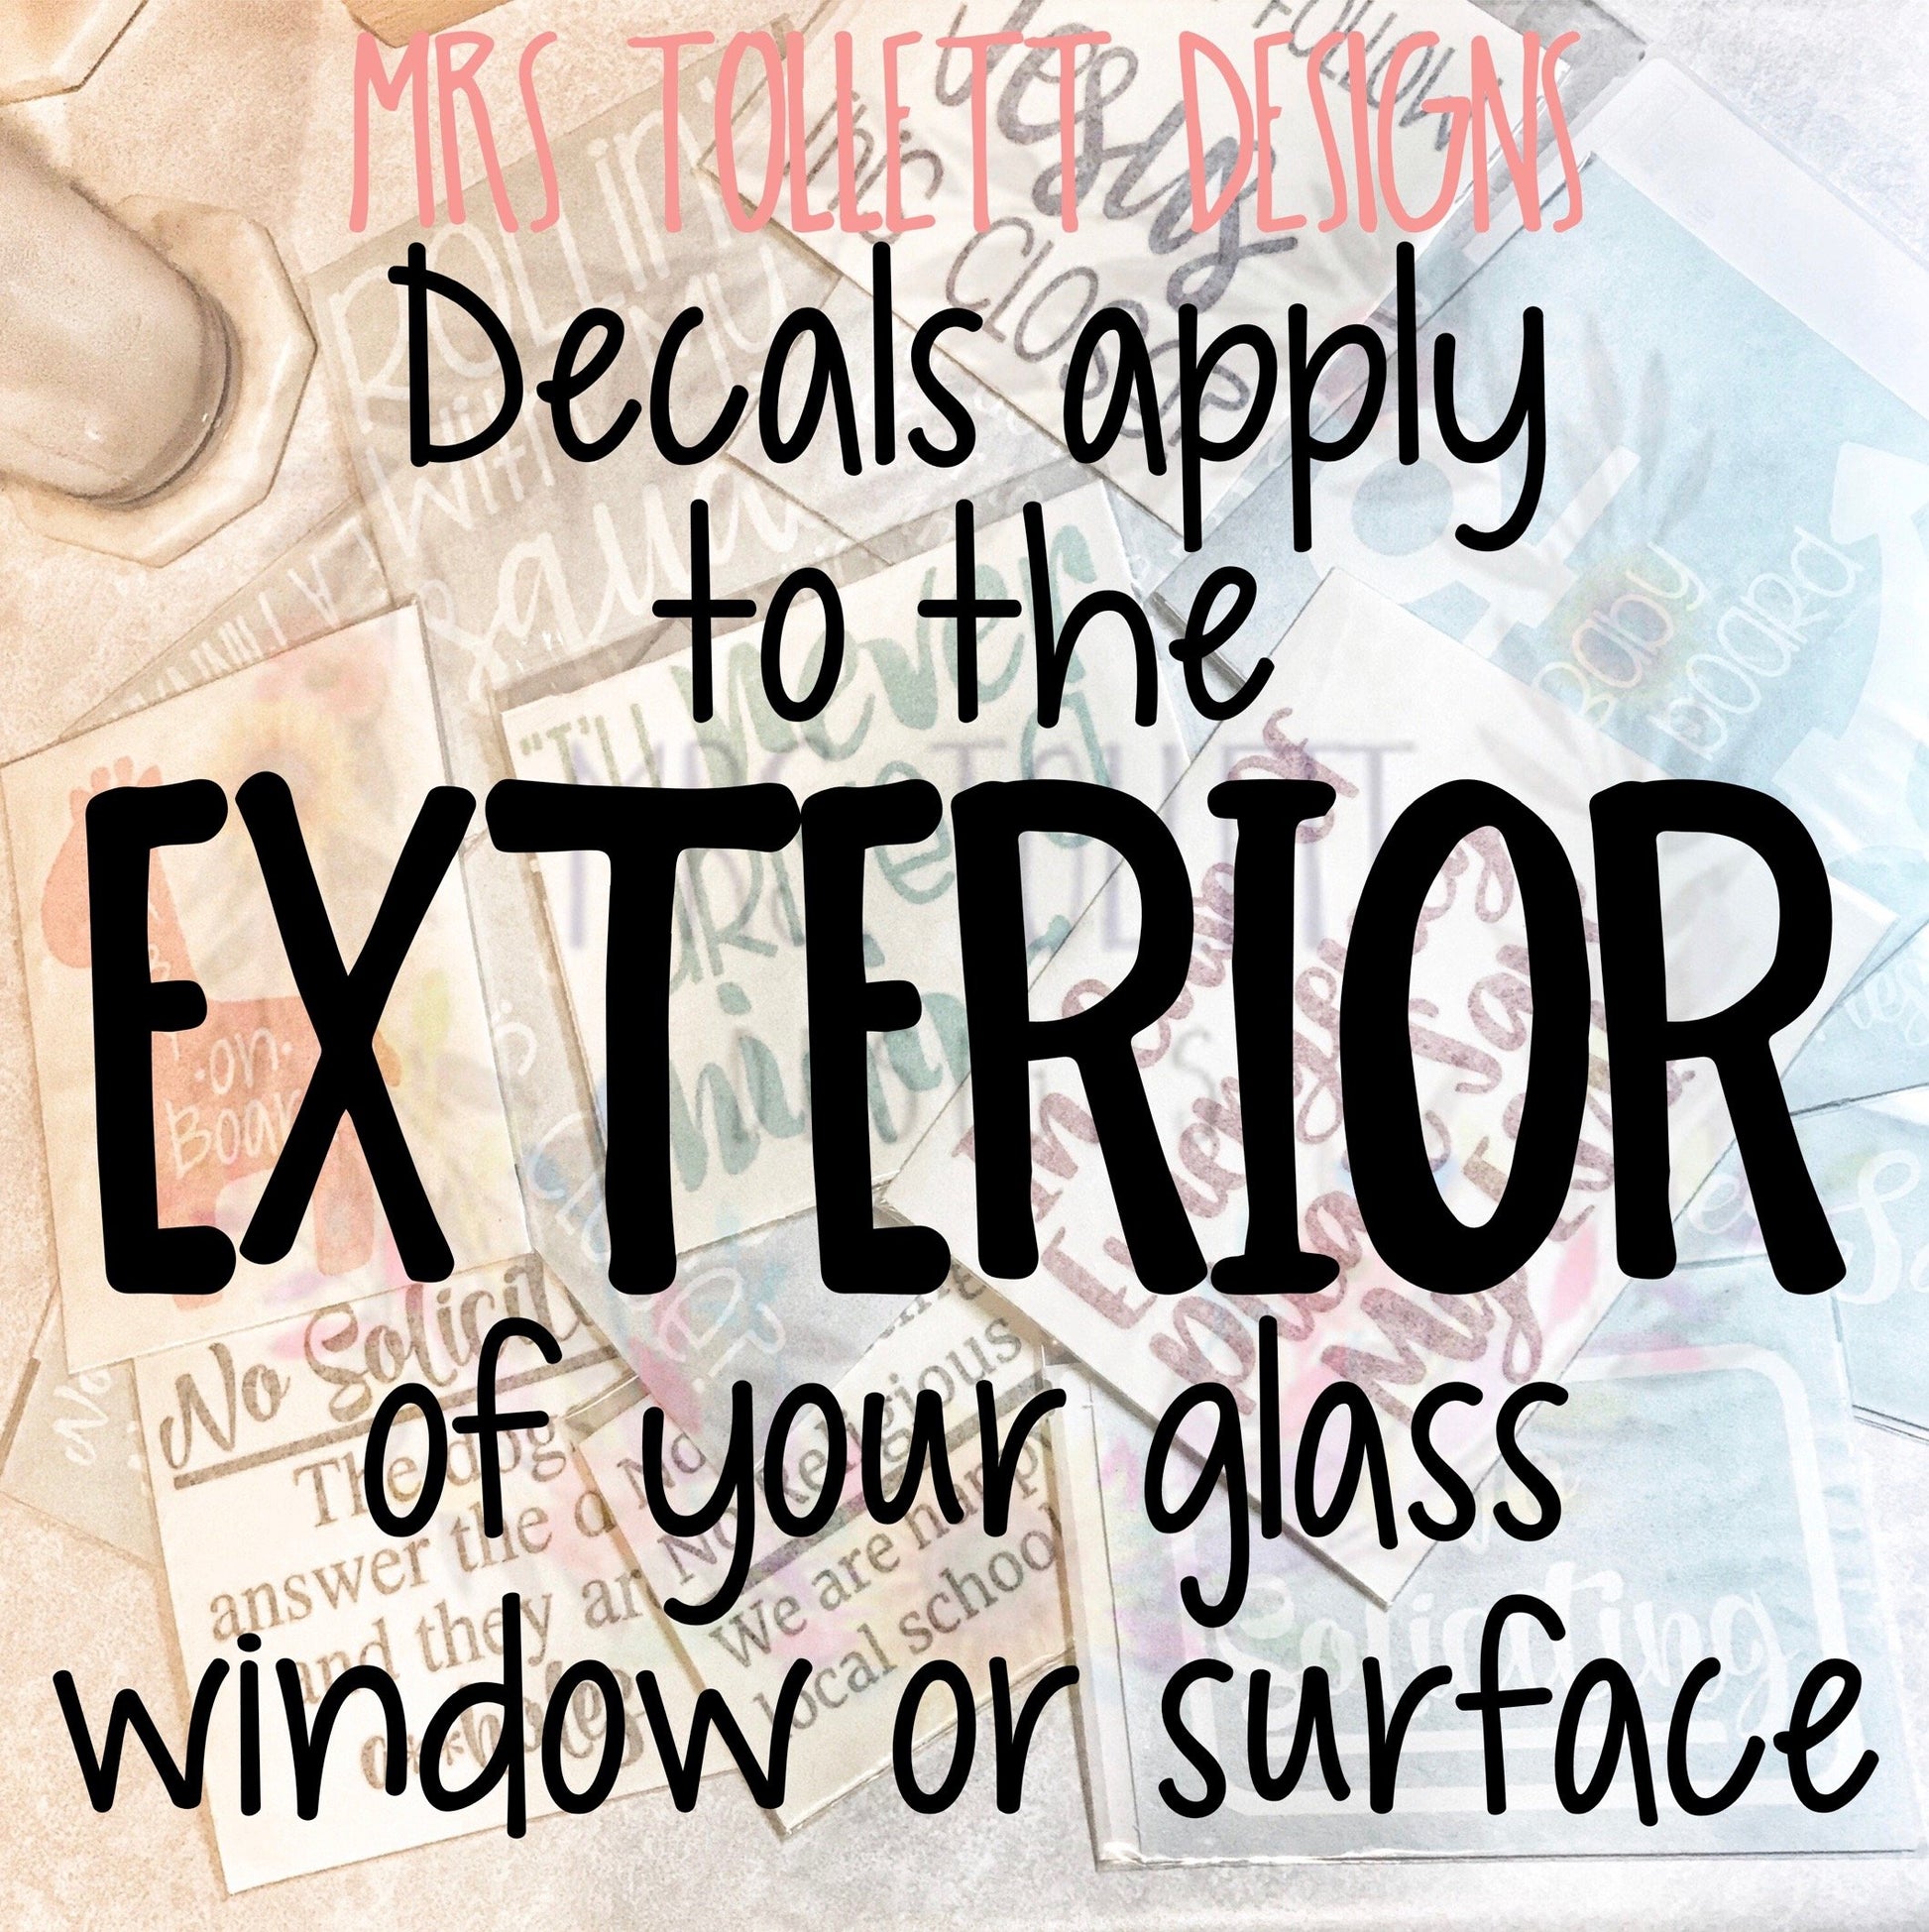 Mrs Tollett Designs, Car Decals, Home Decals, Applies to the exterior of glass